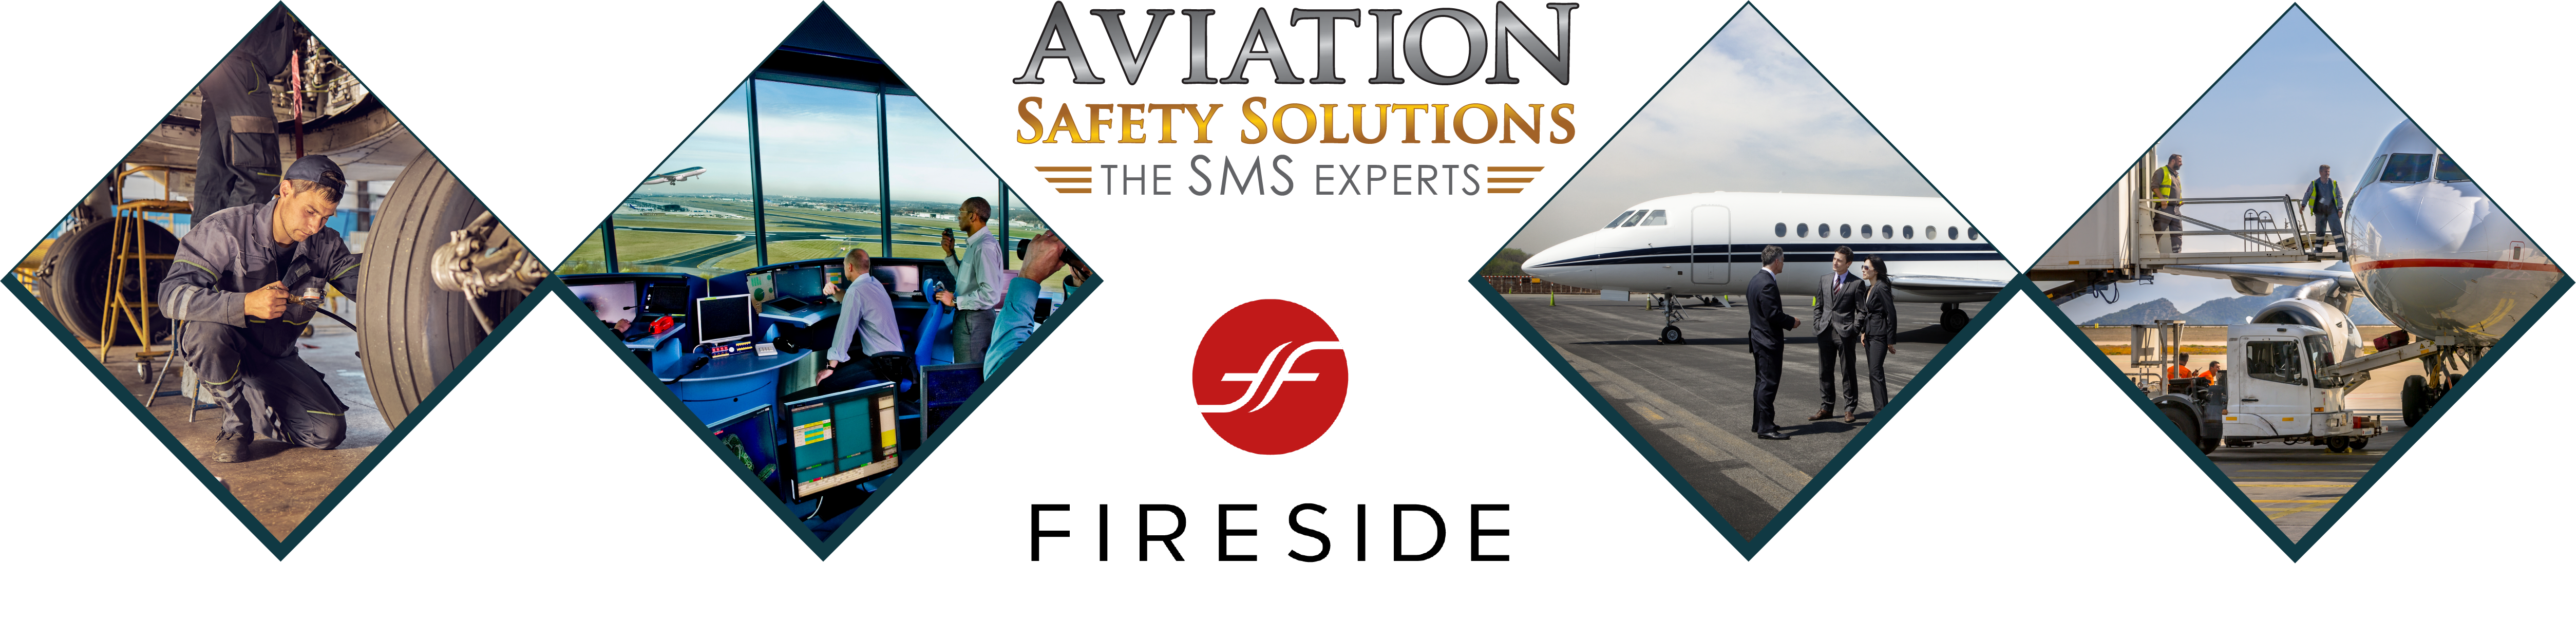 FAA-SMS Part 5 for Flight Operators, Maintenance, Air Traffic Control, Airports, Manufacturers, Flight Schools